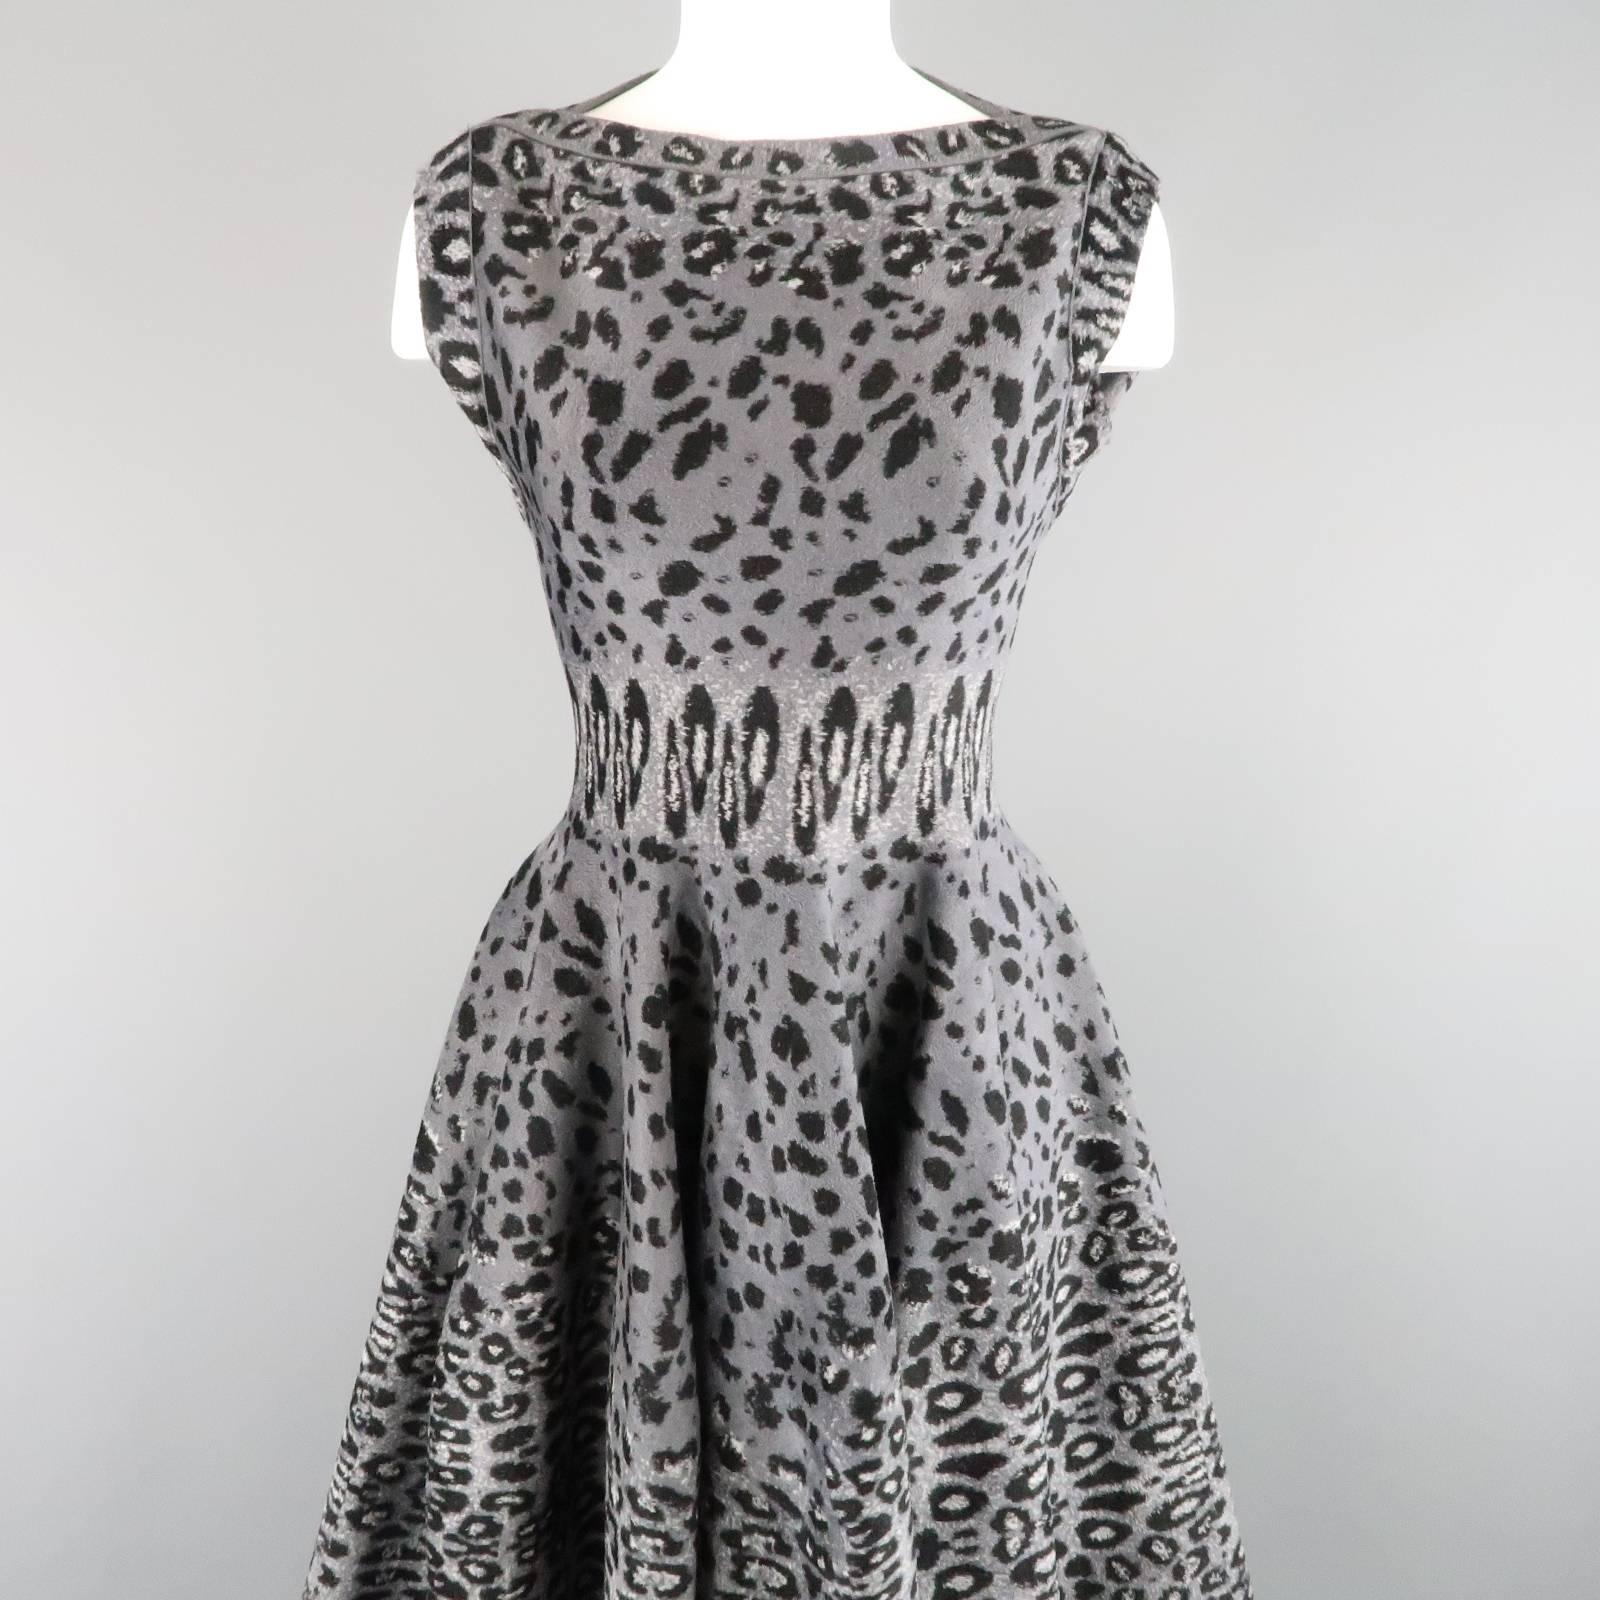 This gorgeous ALAIA Fall 2011 Collection sleeveless cocktail dress comes in a gray cheetah leopard print slightly fuzzy textured stretch knit and features a fit to flair silhouette with a ruffled A line skirt and boat neck line. Tags removed.